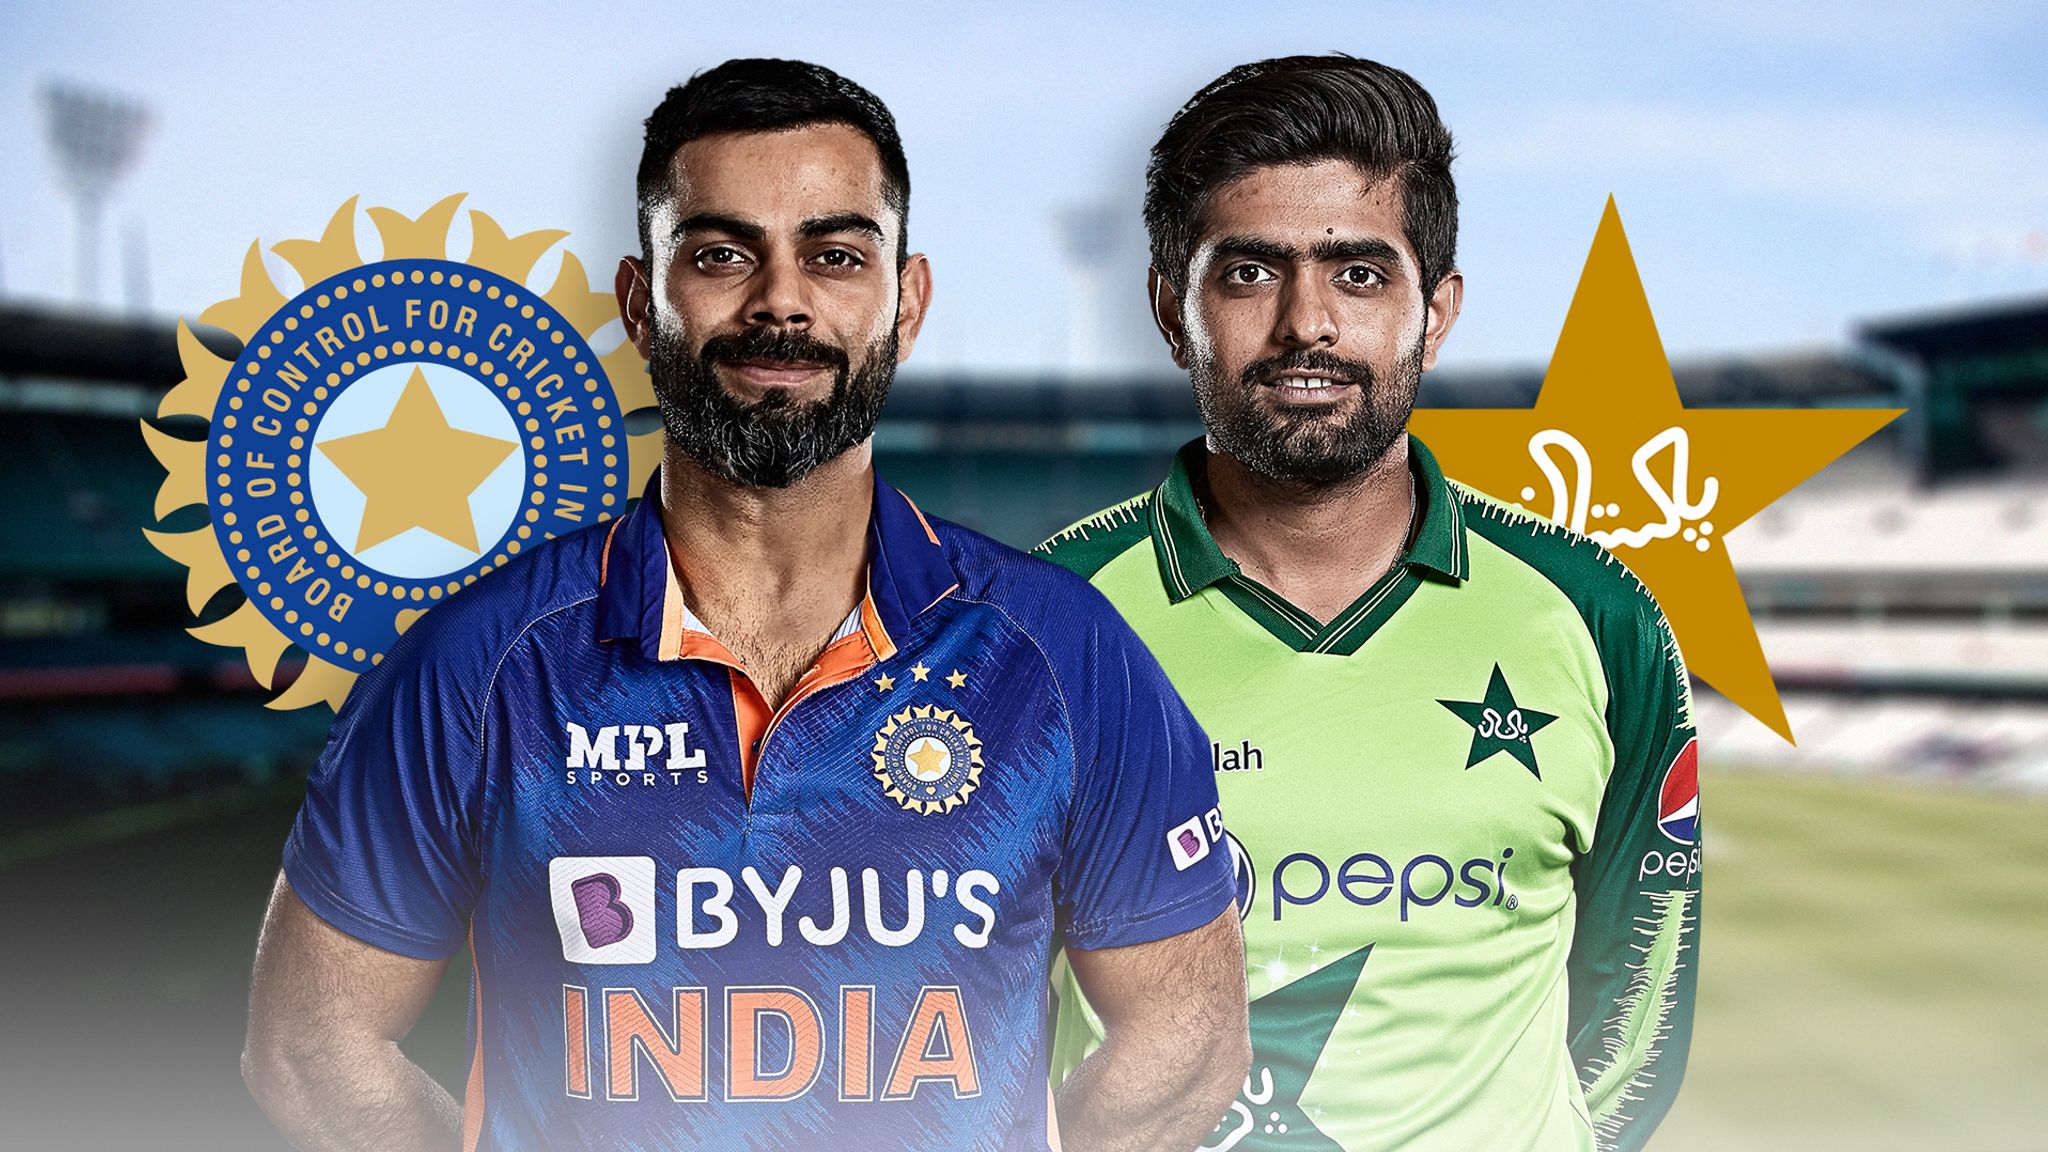 T20 World Cup: India face Pakistan as one of the fiercest rivalries in cricket reignites in Australia | Cricket News | Sky Sports